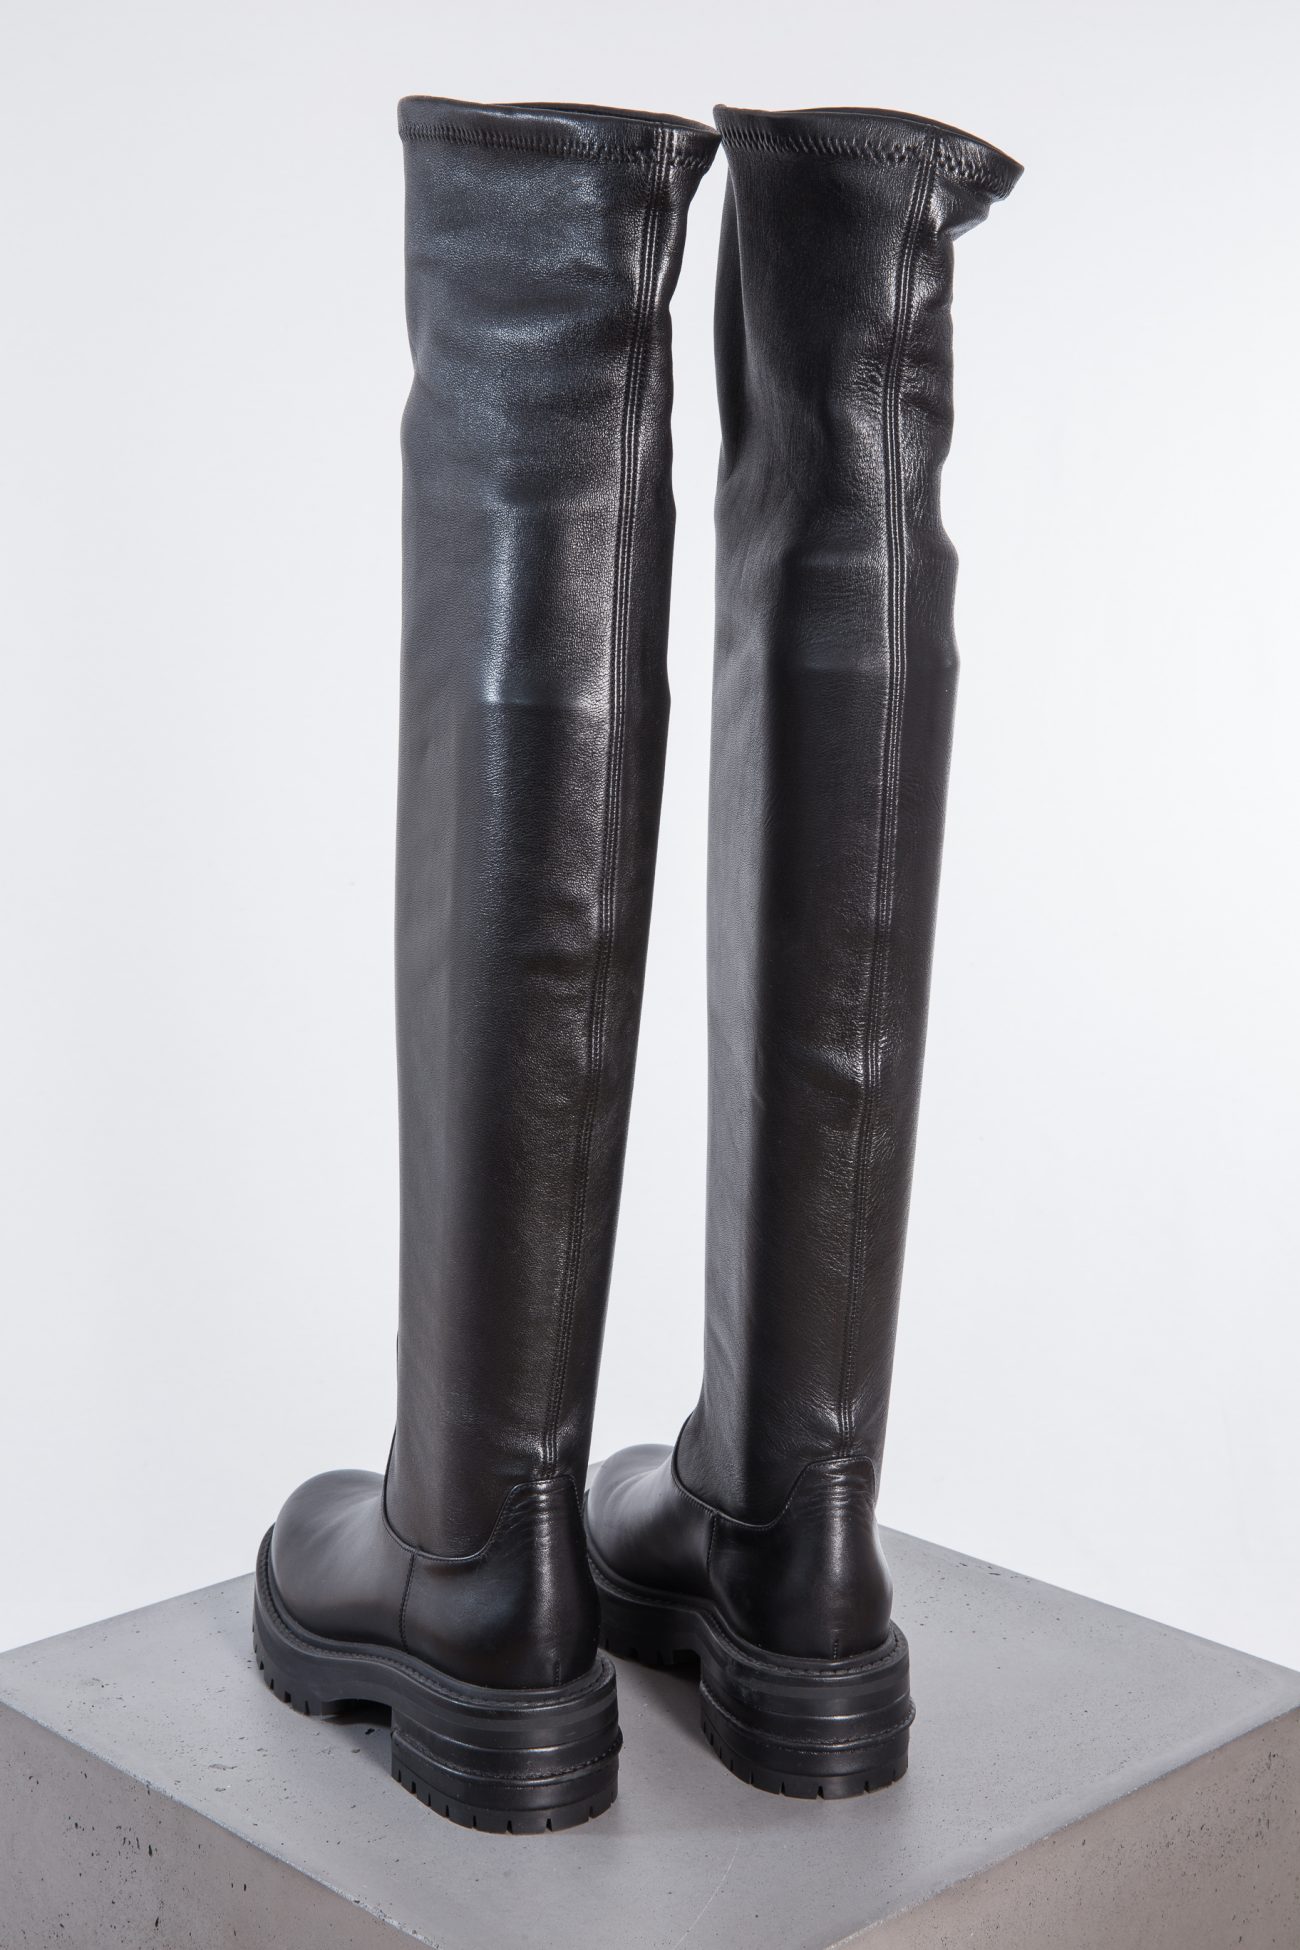 Dior Over-The-Knee Boots, 36.5 